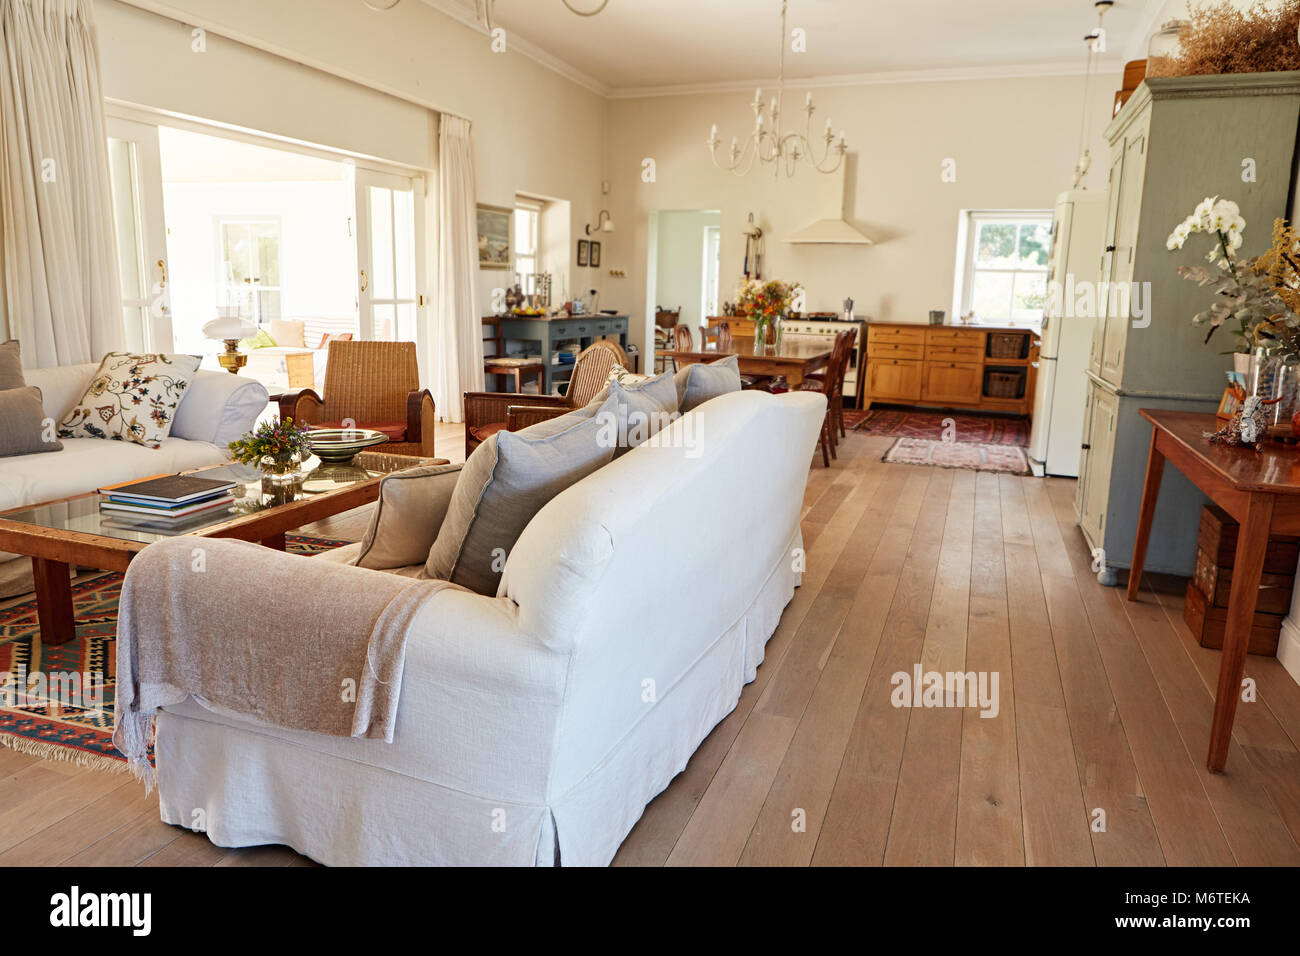 Interior of the lounge area in a country style home Stock Photo